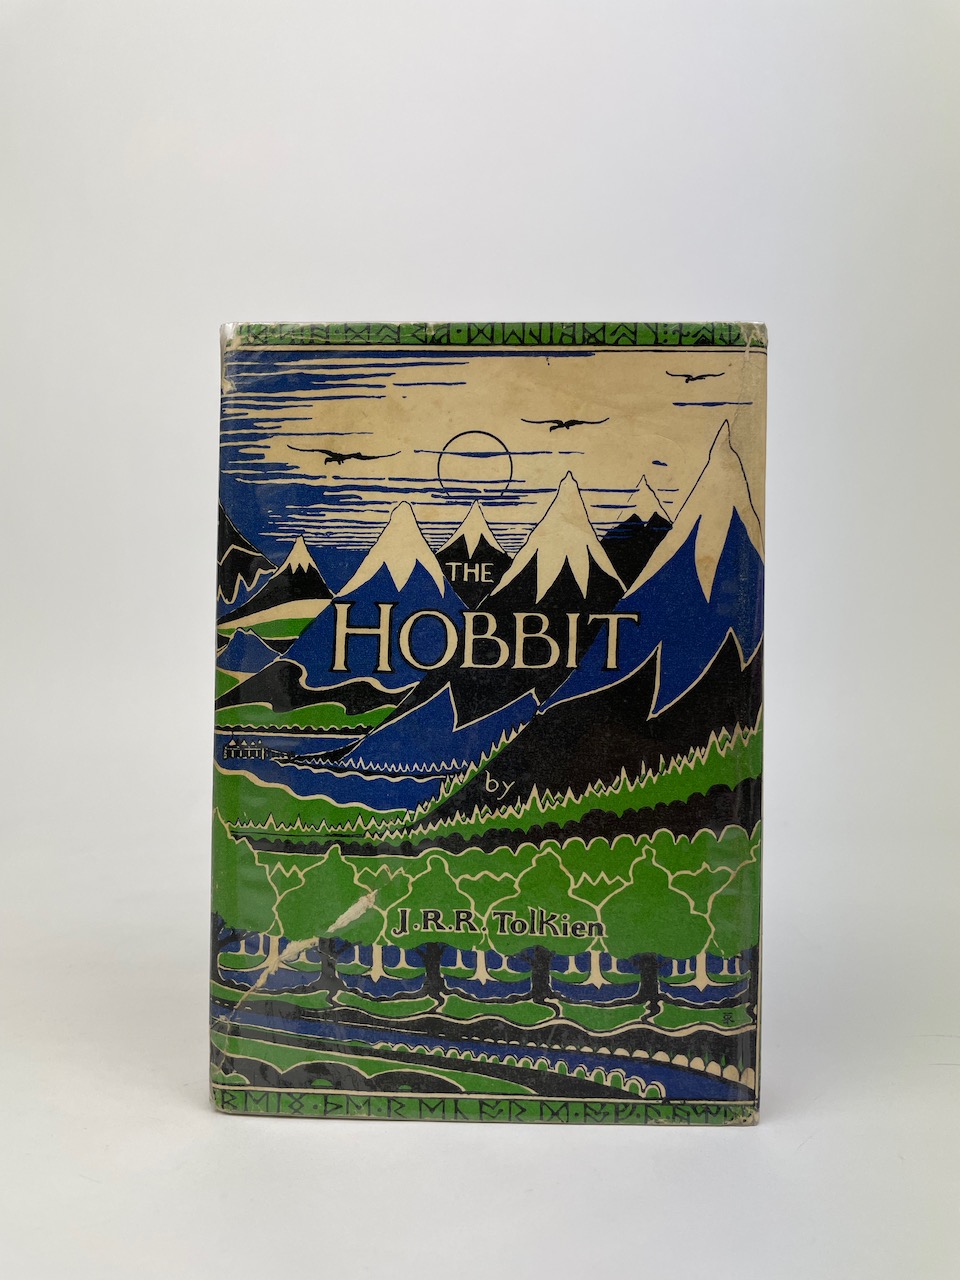 1961, 13th UK The Hobbit with original dust jacket in fine condition